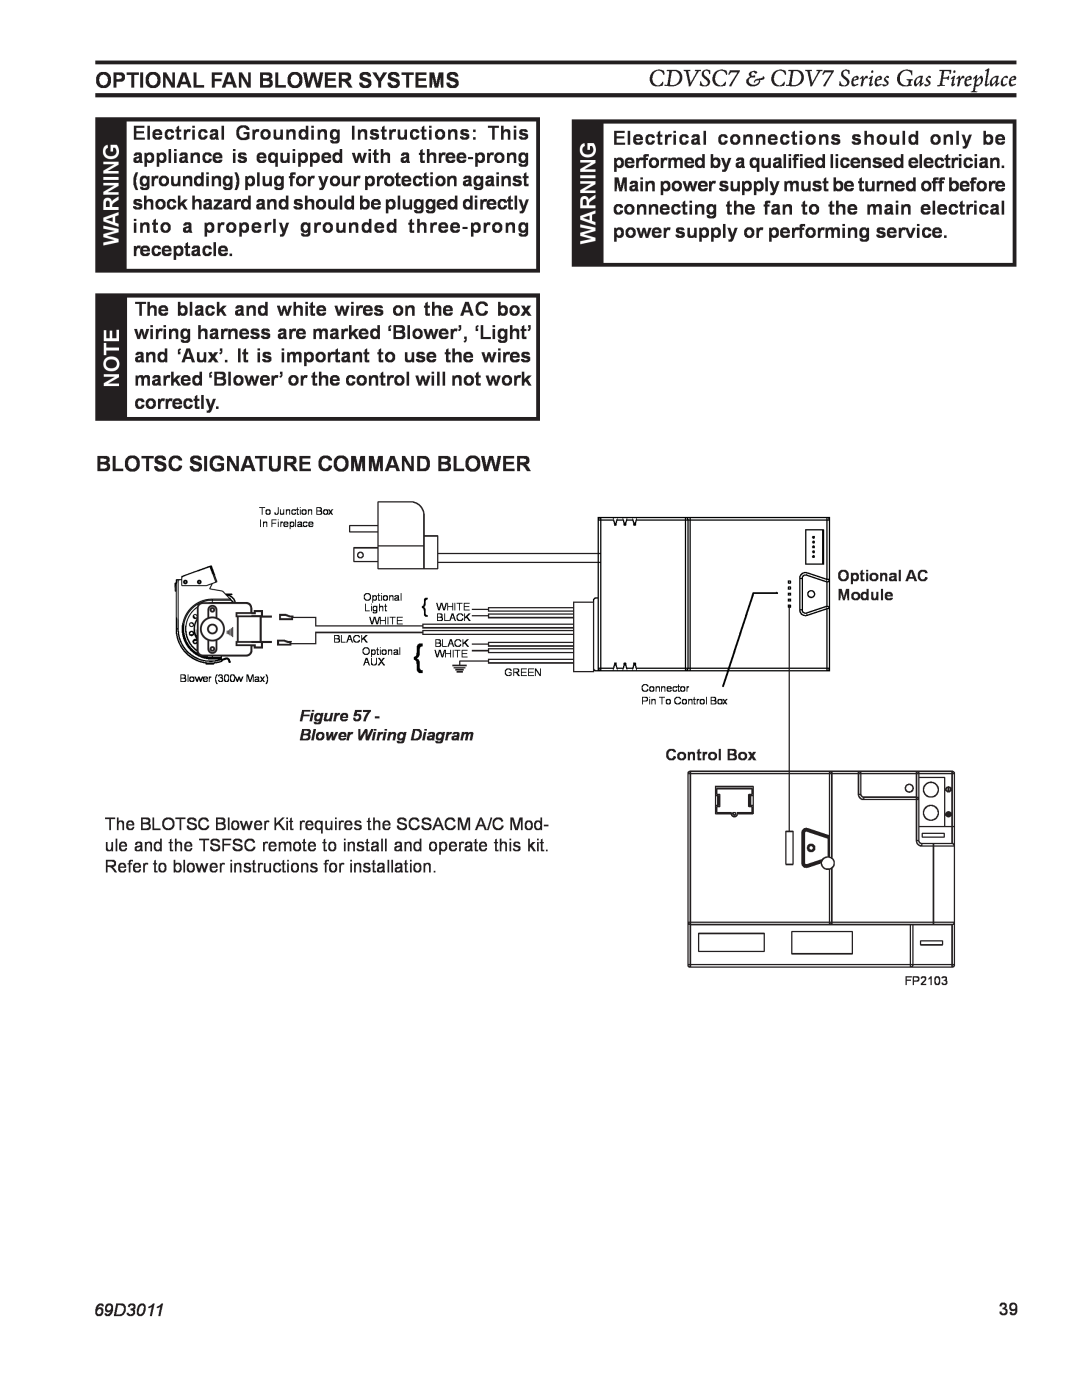 Monessen Hearth CDV7 Optional Fan Blower Systems, Blotsc Signature Command Blower, Electrical Grounding Instructions This 